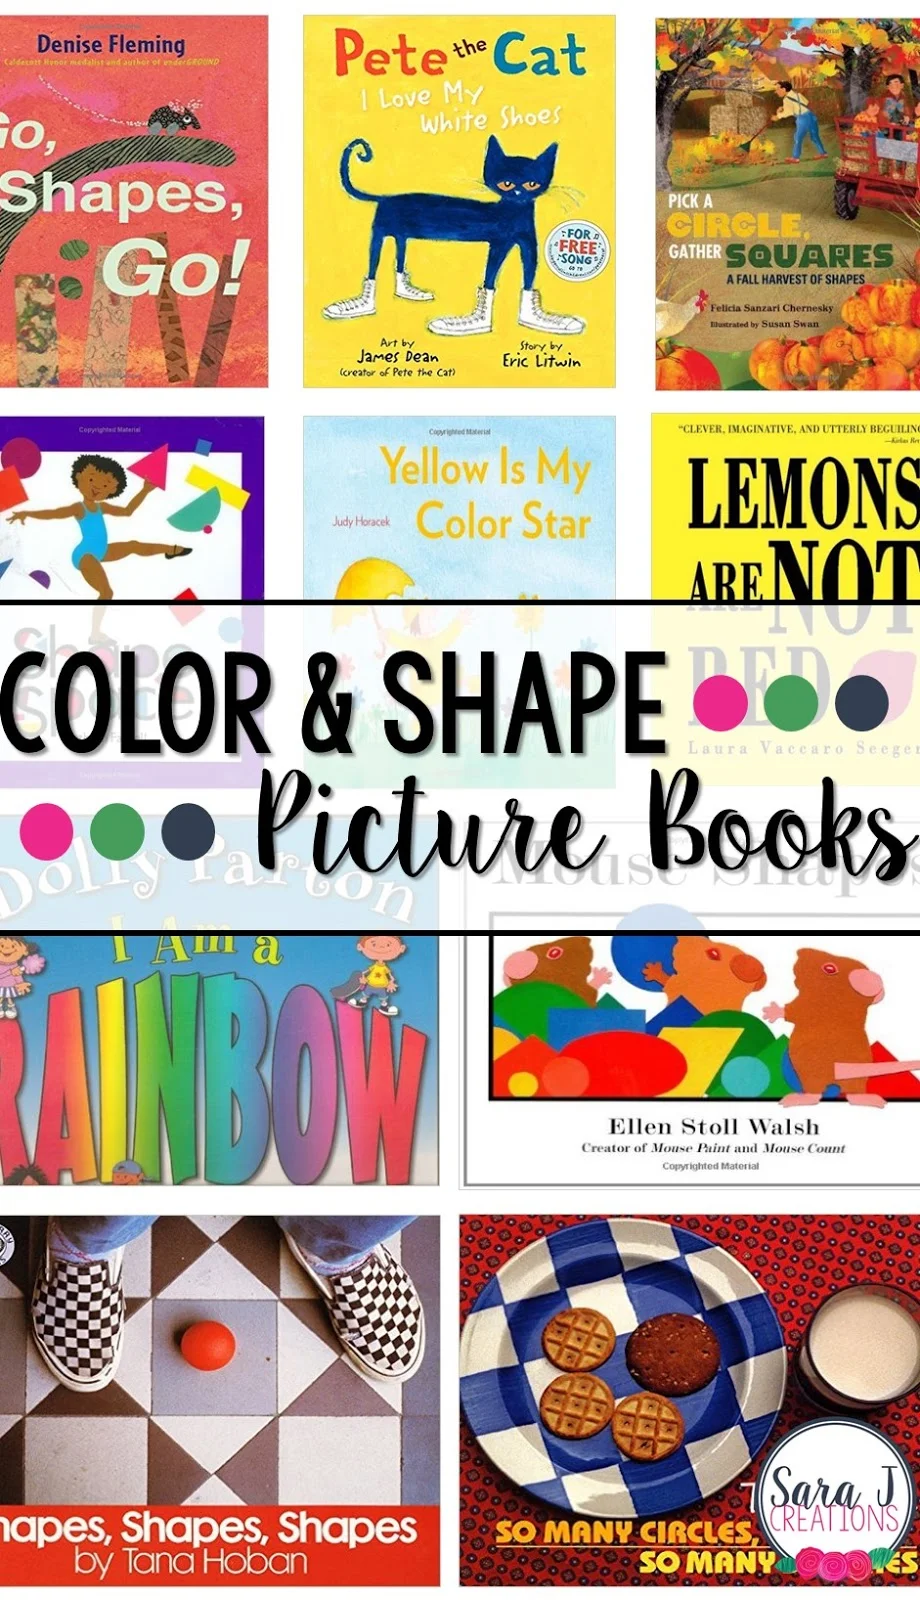 Quick reference to some great color and shape picture books for kids!